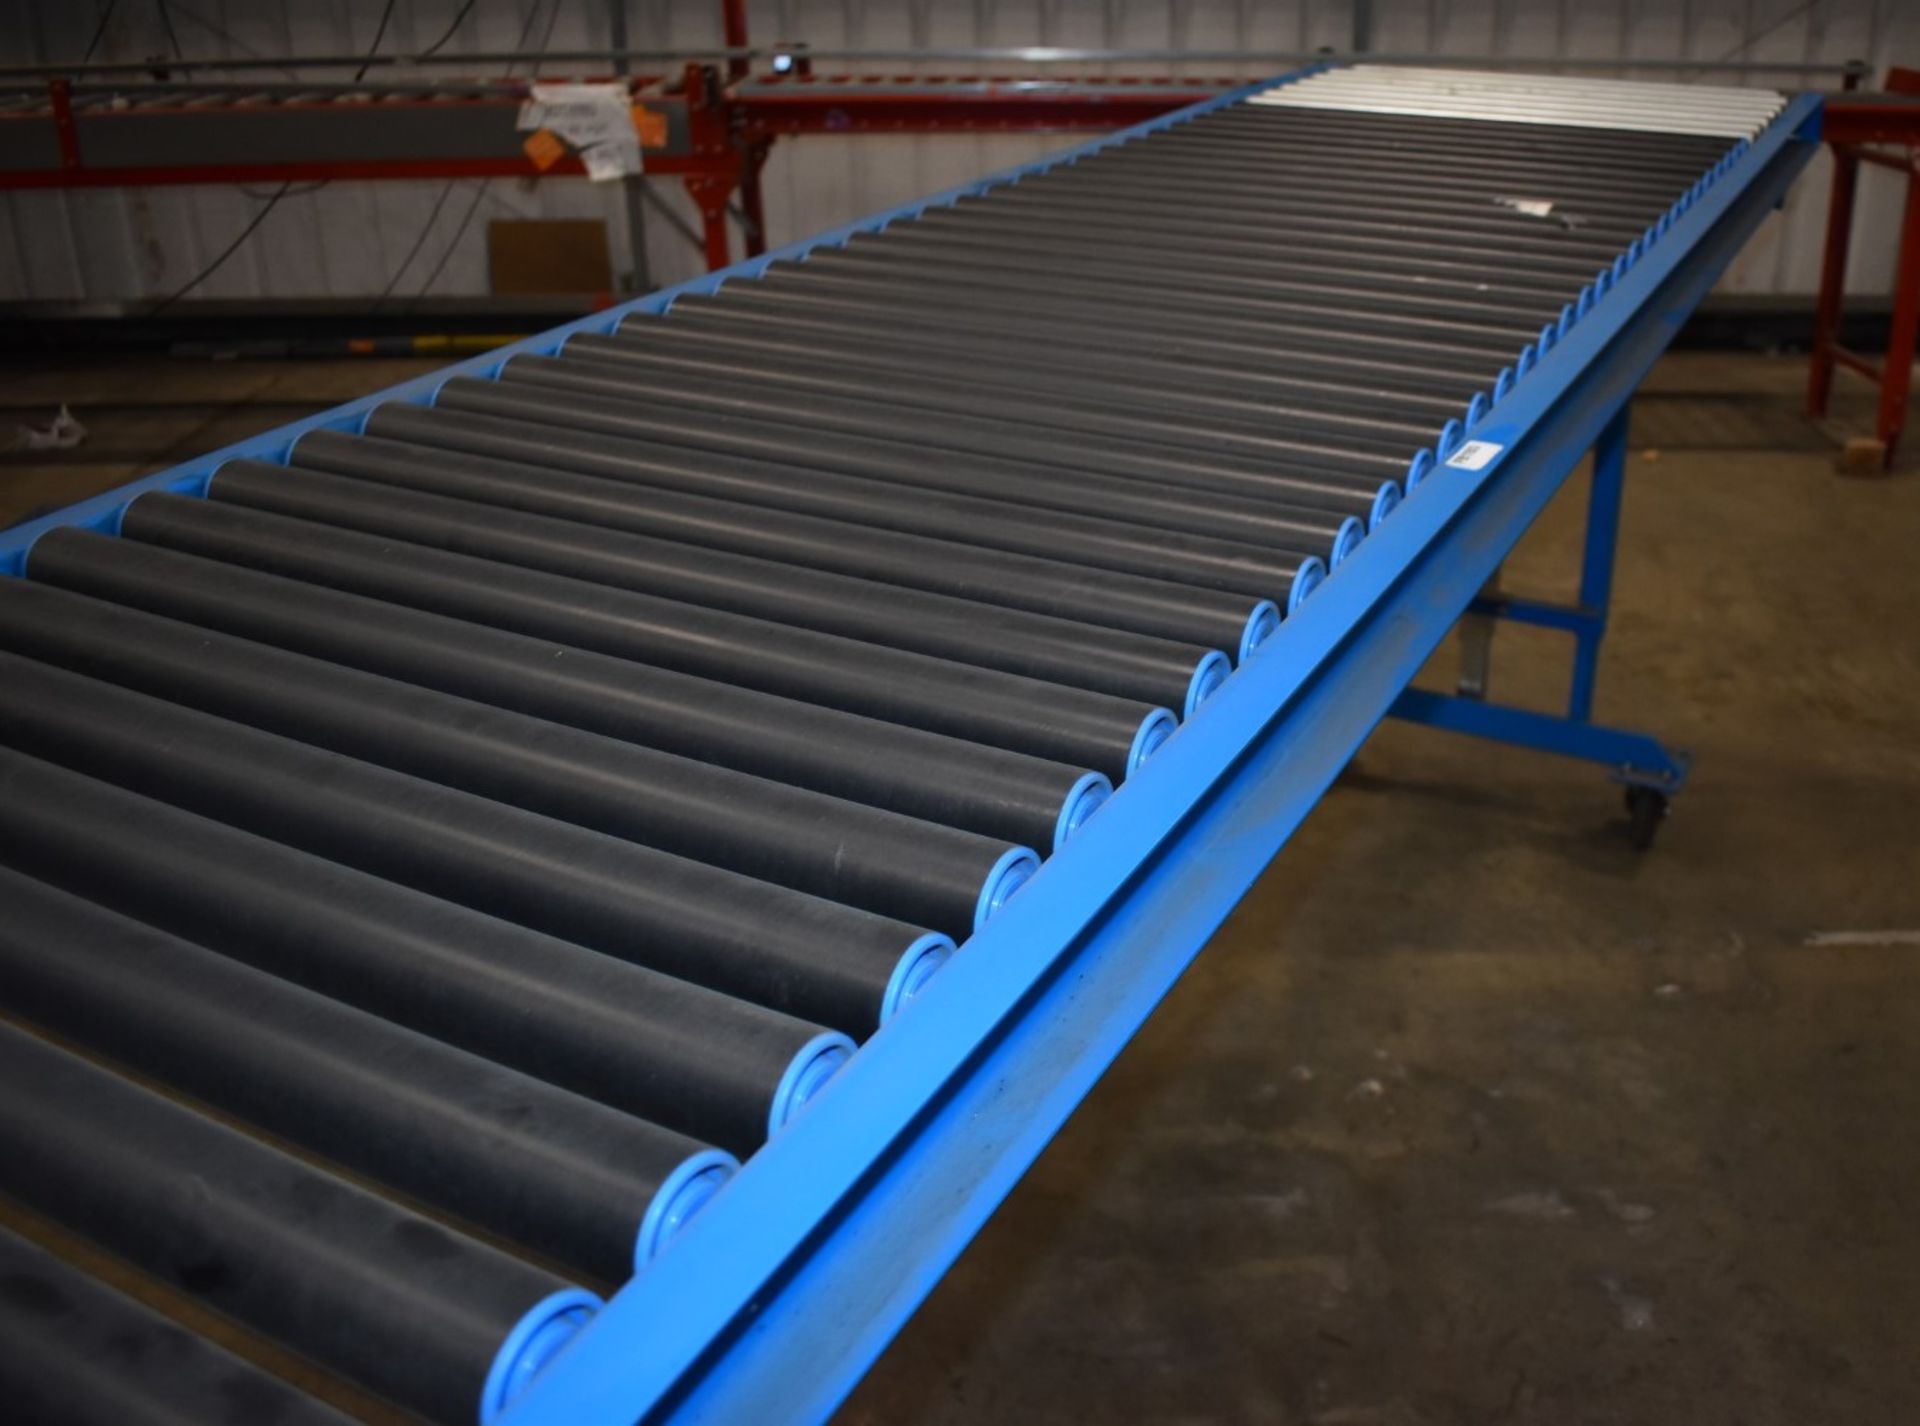 1 x Adjustable Manual Gravity Telescopic Conveyor - For Loading Trucks - Ref FE193A - CL480 - - Image 5 of 9